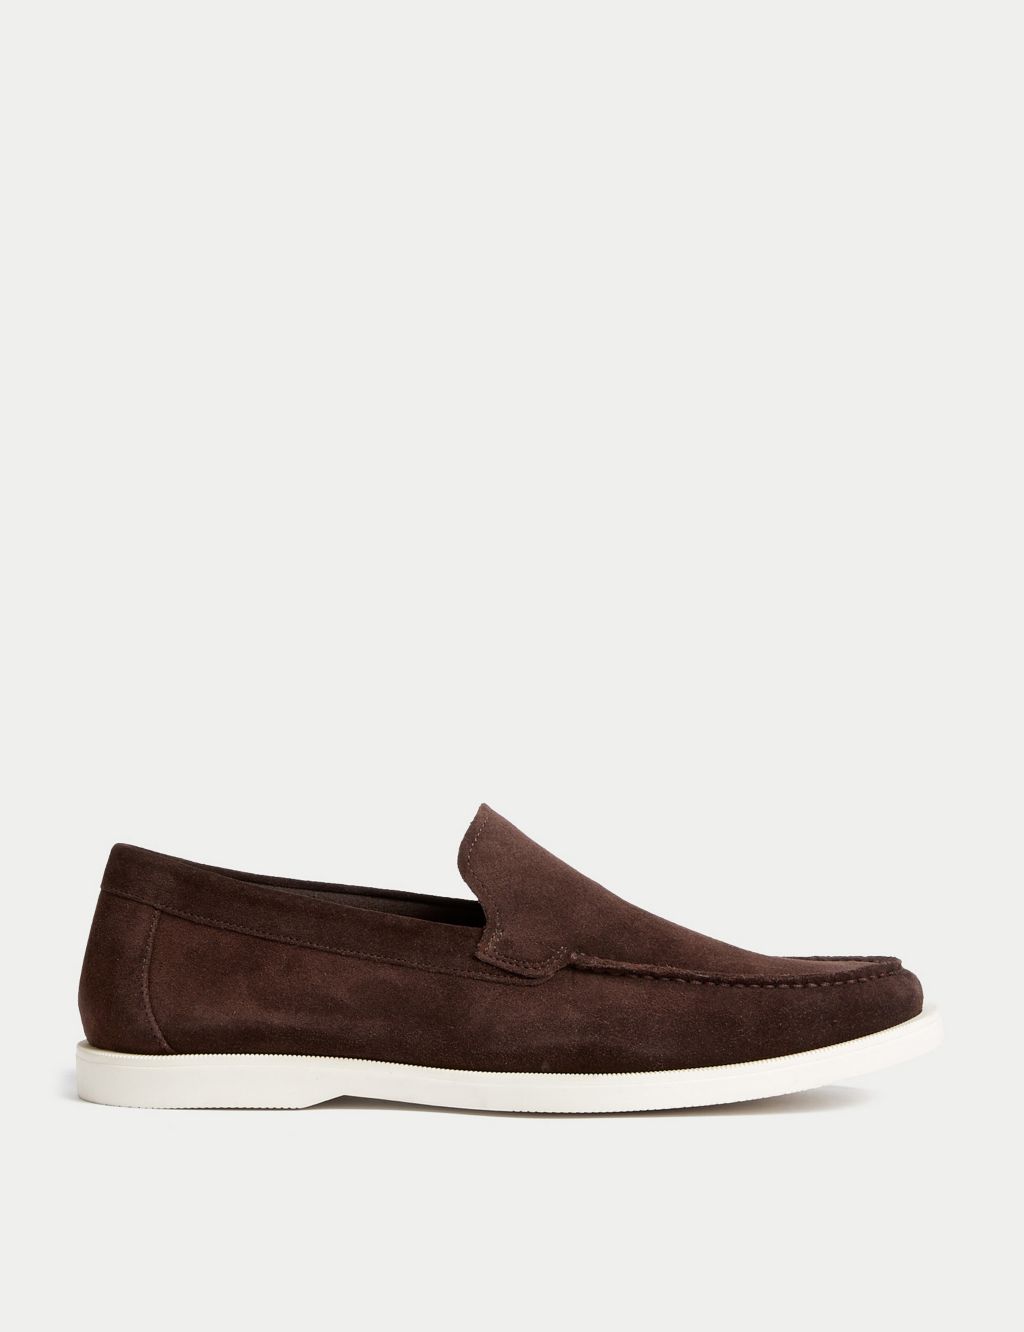 Suede Loafers image 1